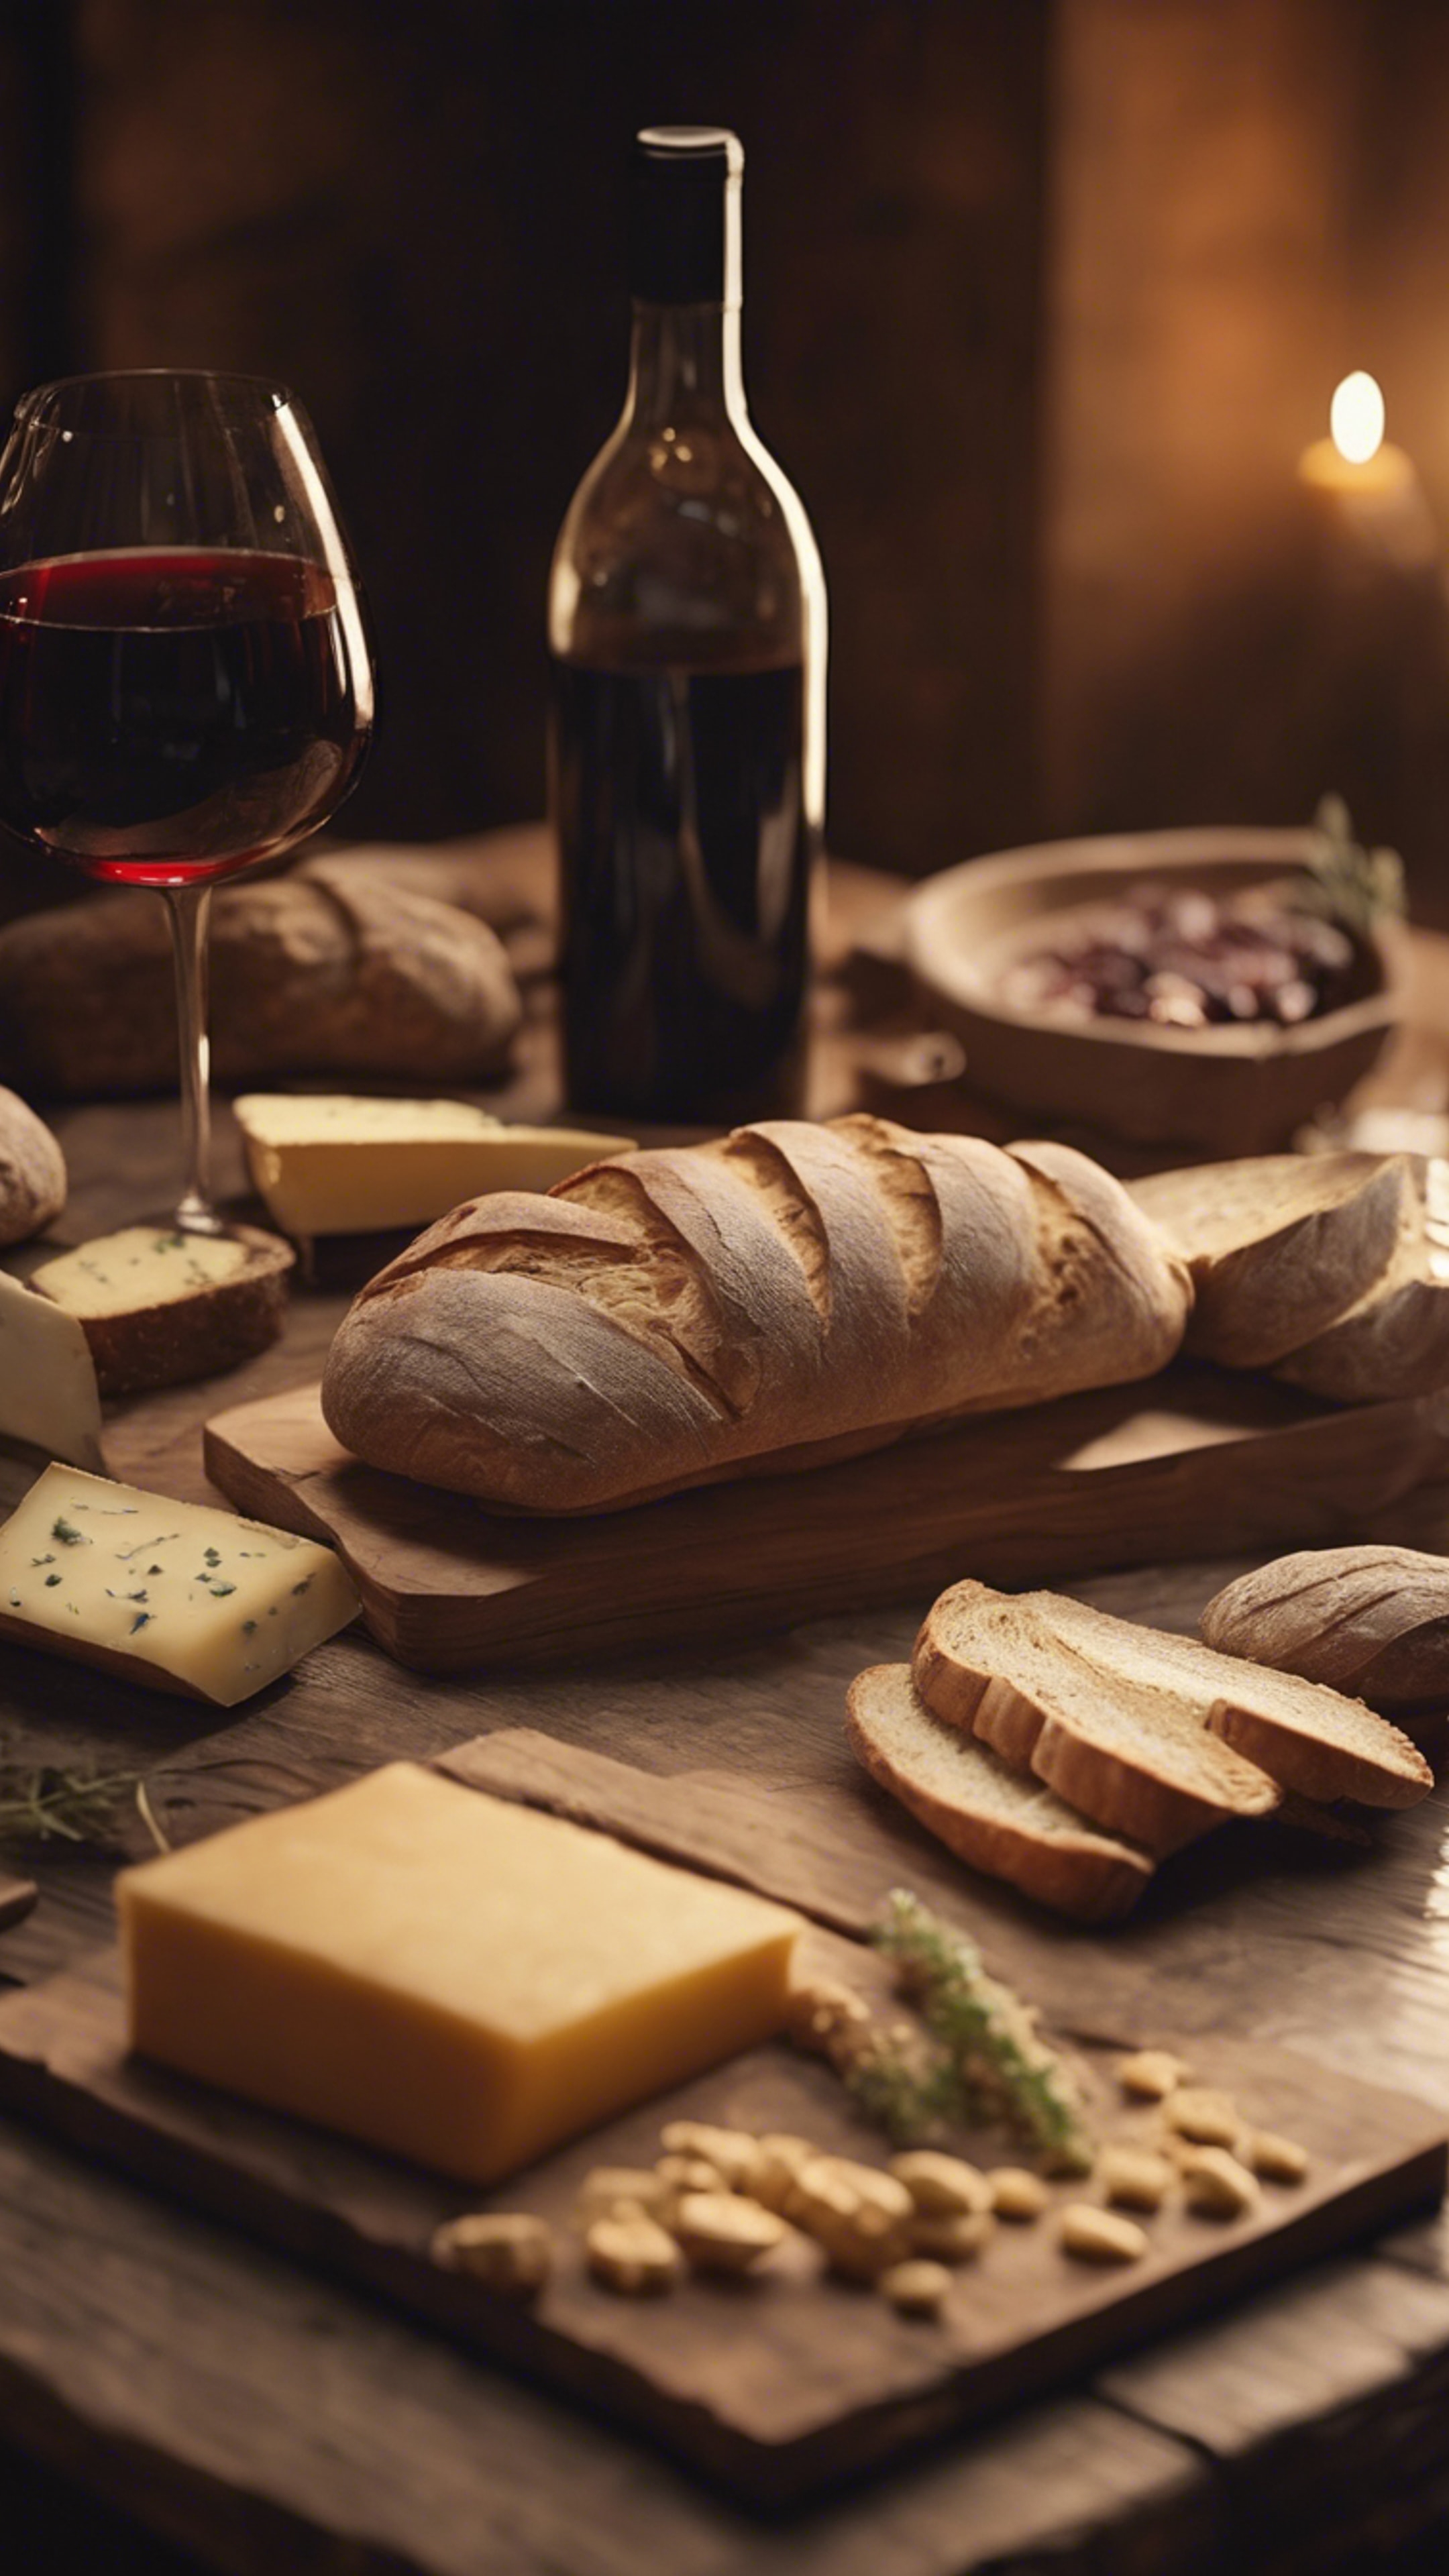 Detailed close-up of a rustic French country-style wooden table set with fresh bread, wine, and cheese under warm interior lighting. Валлпапер[6a74bb7d88b74d998281]